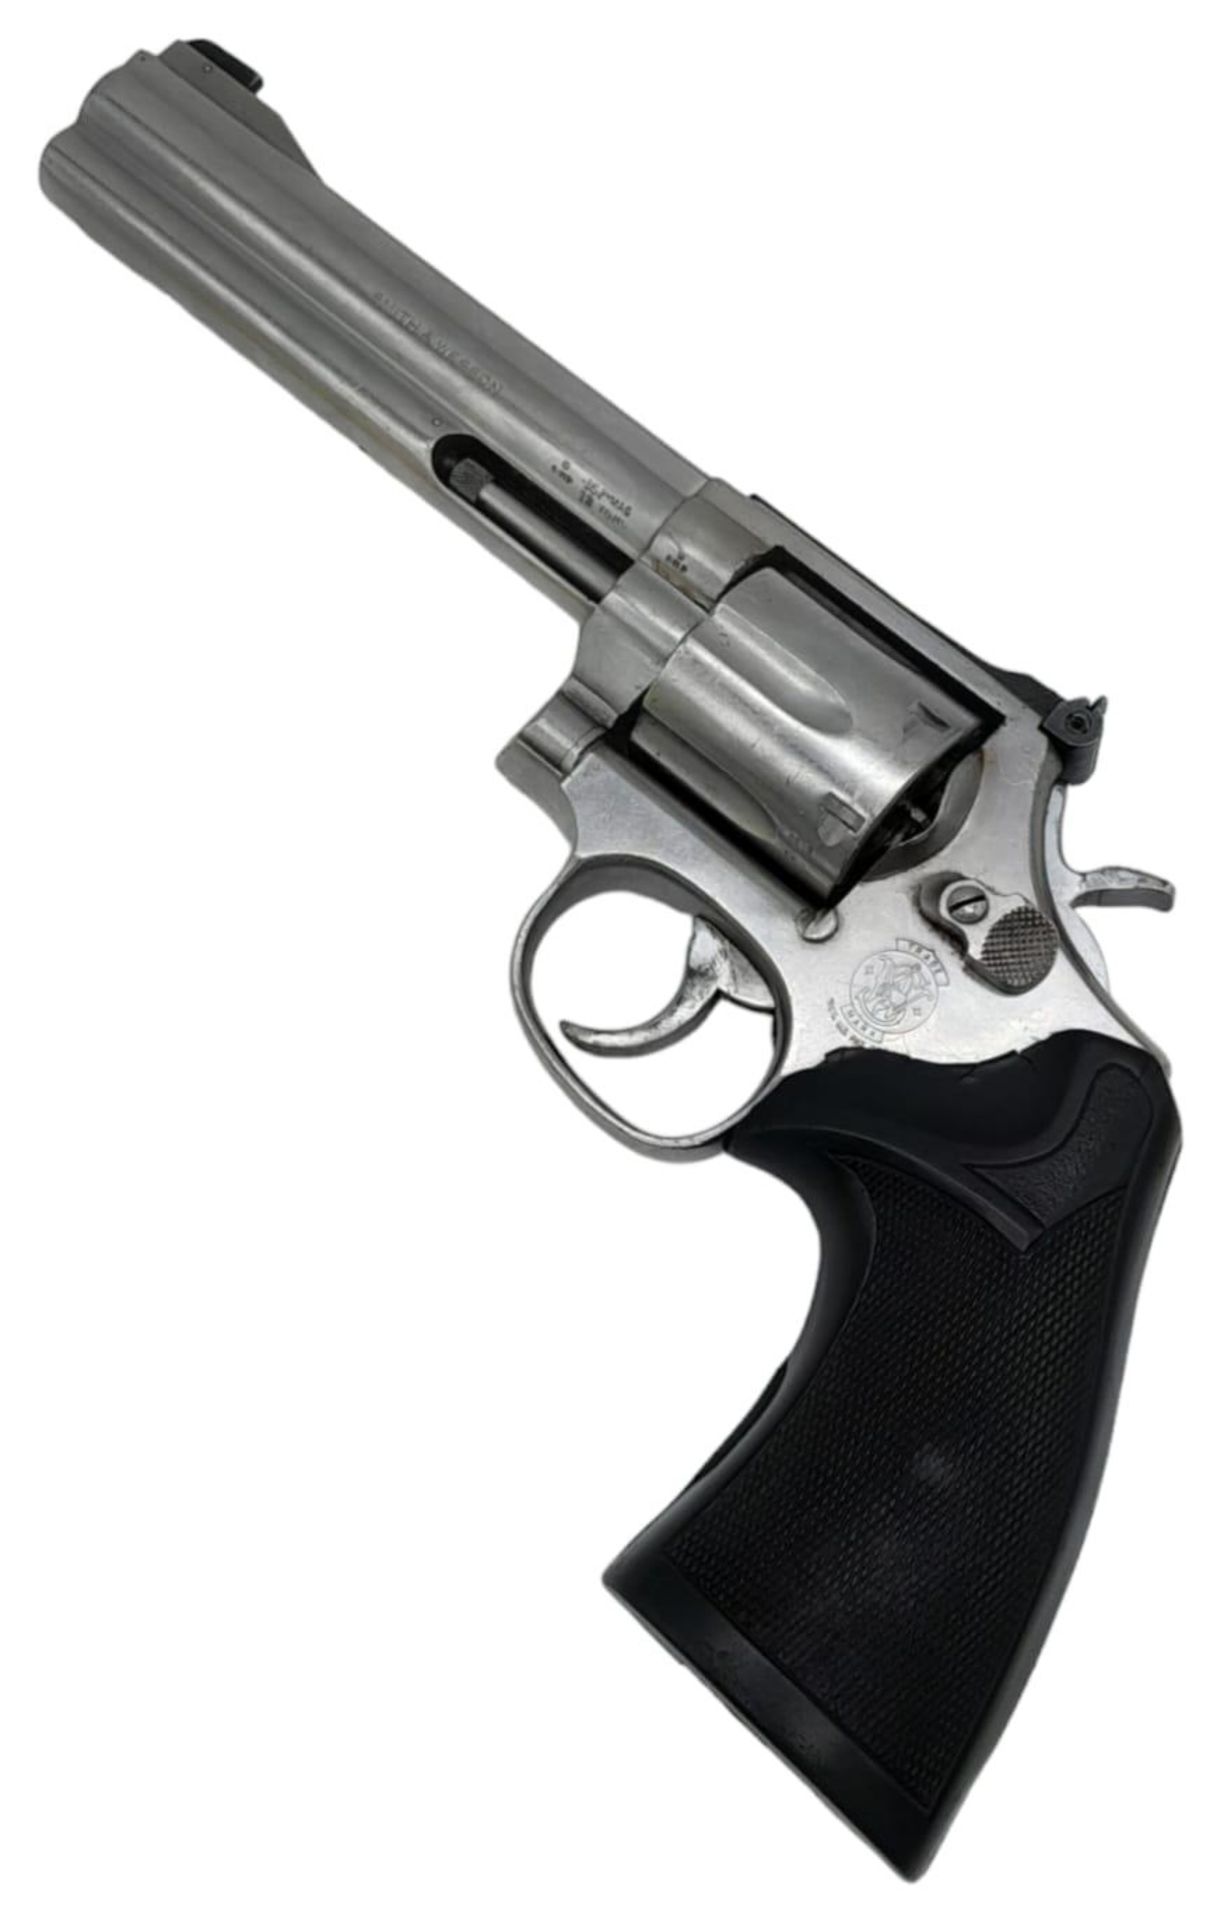 A Deactivated Smith and Wesson 357 Magnum. This classic Hollywood revolver has a chrome finish